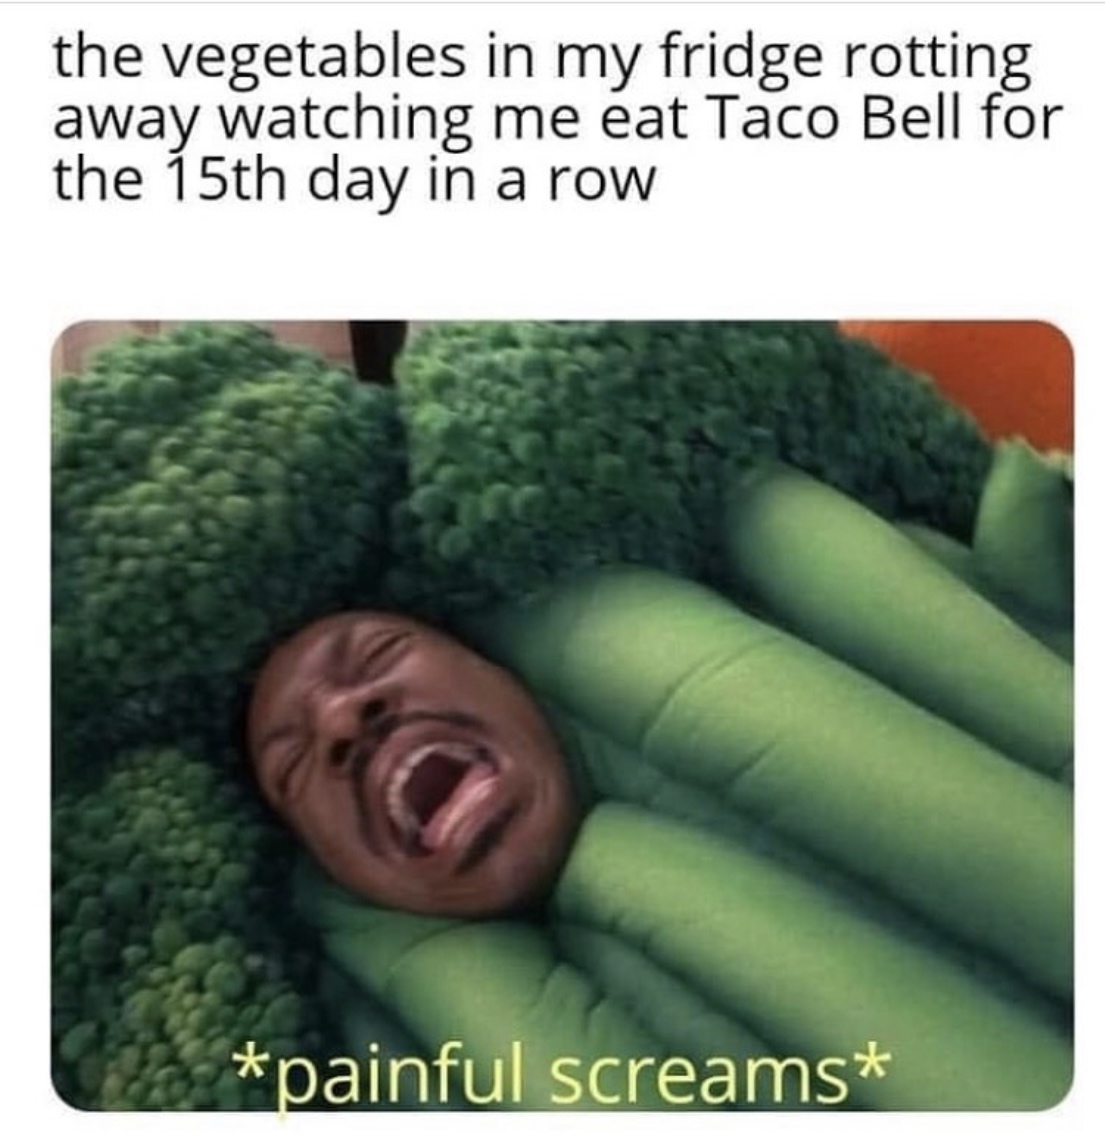 eddie murphy broccoli meme - the vegetables in my fridge rotting away watching me eat Taco Bell for the 15th day in a row 20 painful screams